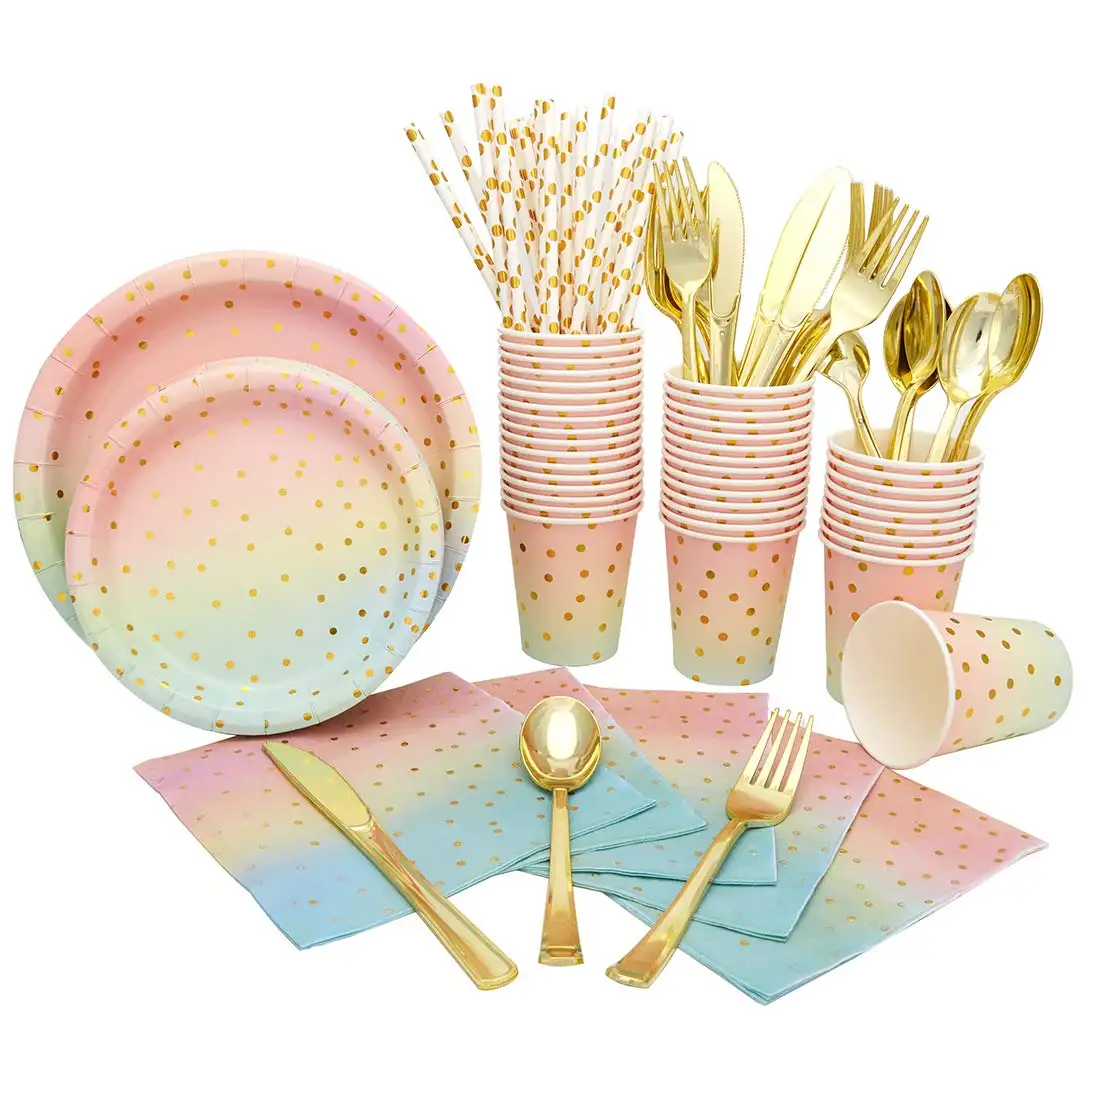 Hot Sale 25 Pieces Party Supplies Serves 25 Sets for Wedding Bridal Shower Engagement Birthday Party tableware sets